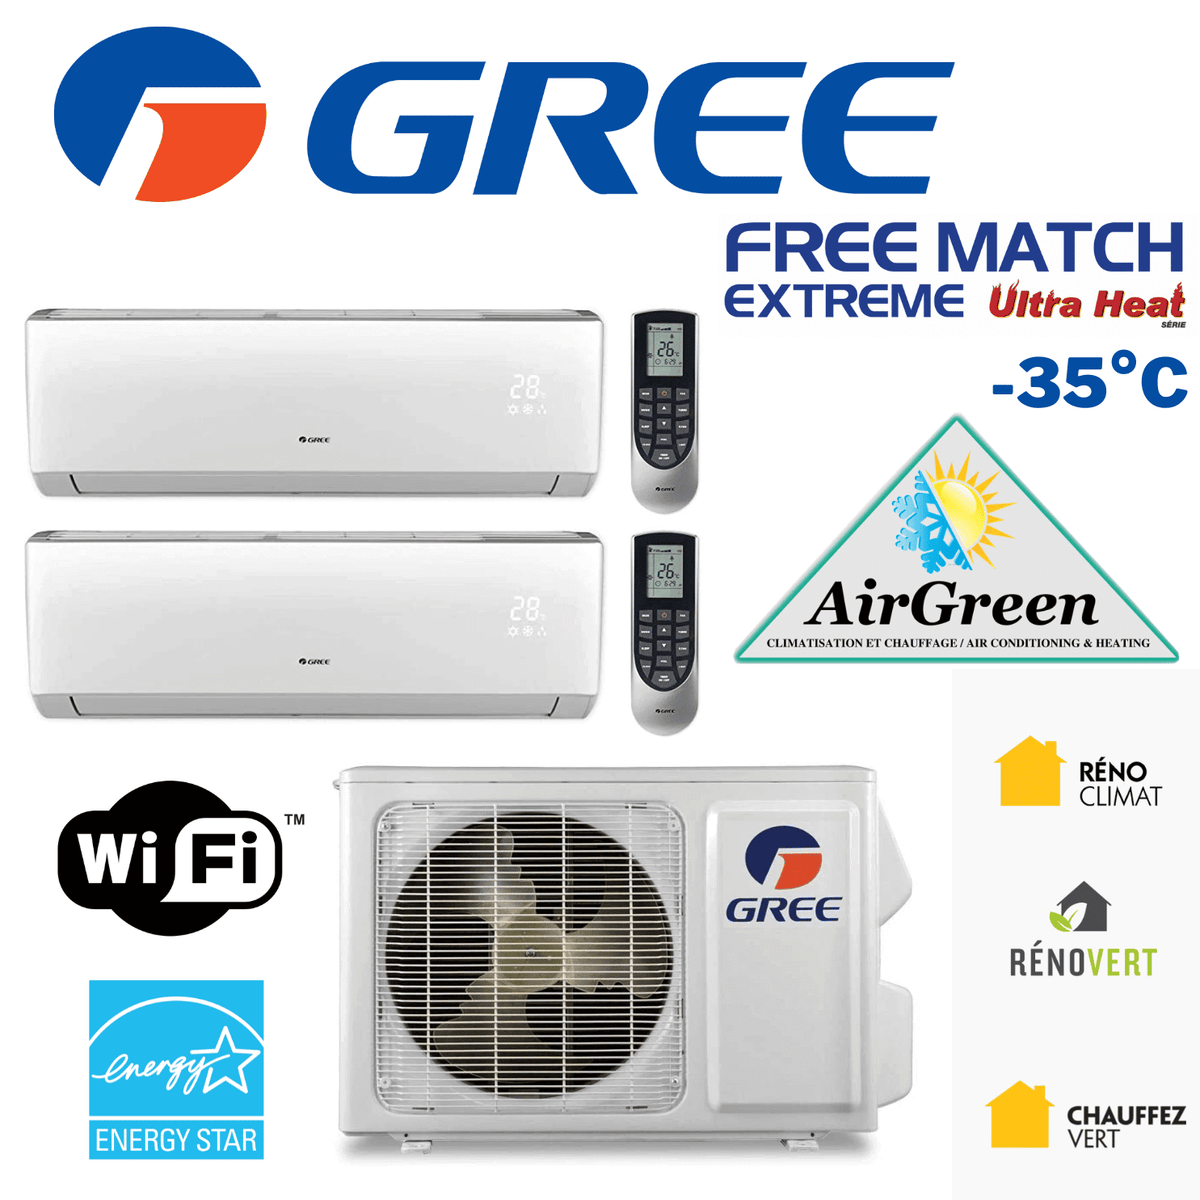 Thermopompe Double Zone Gree Free Match Extreme Compresseur 18 000 BTU